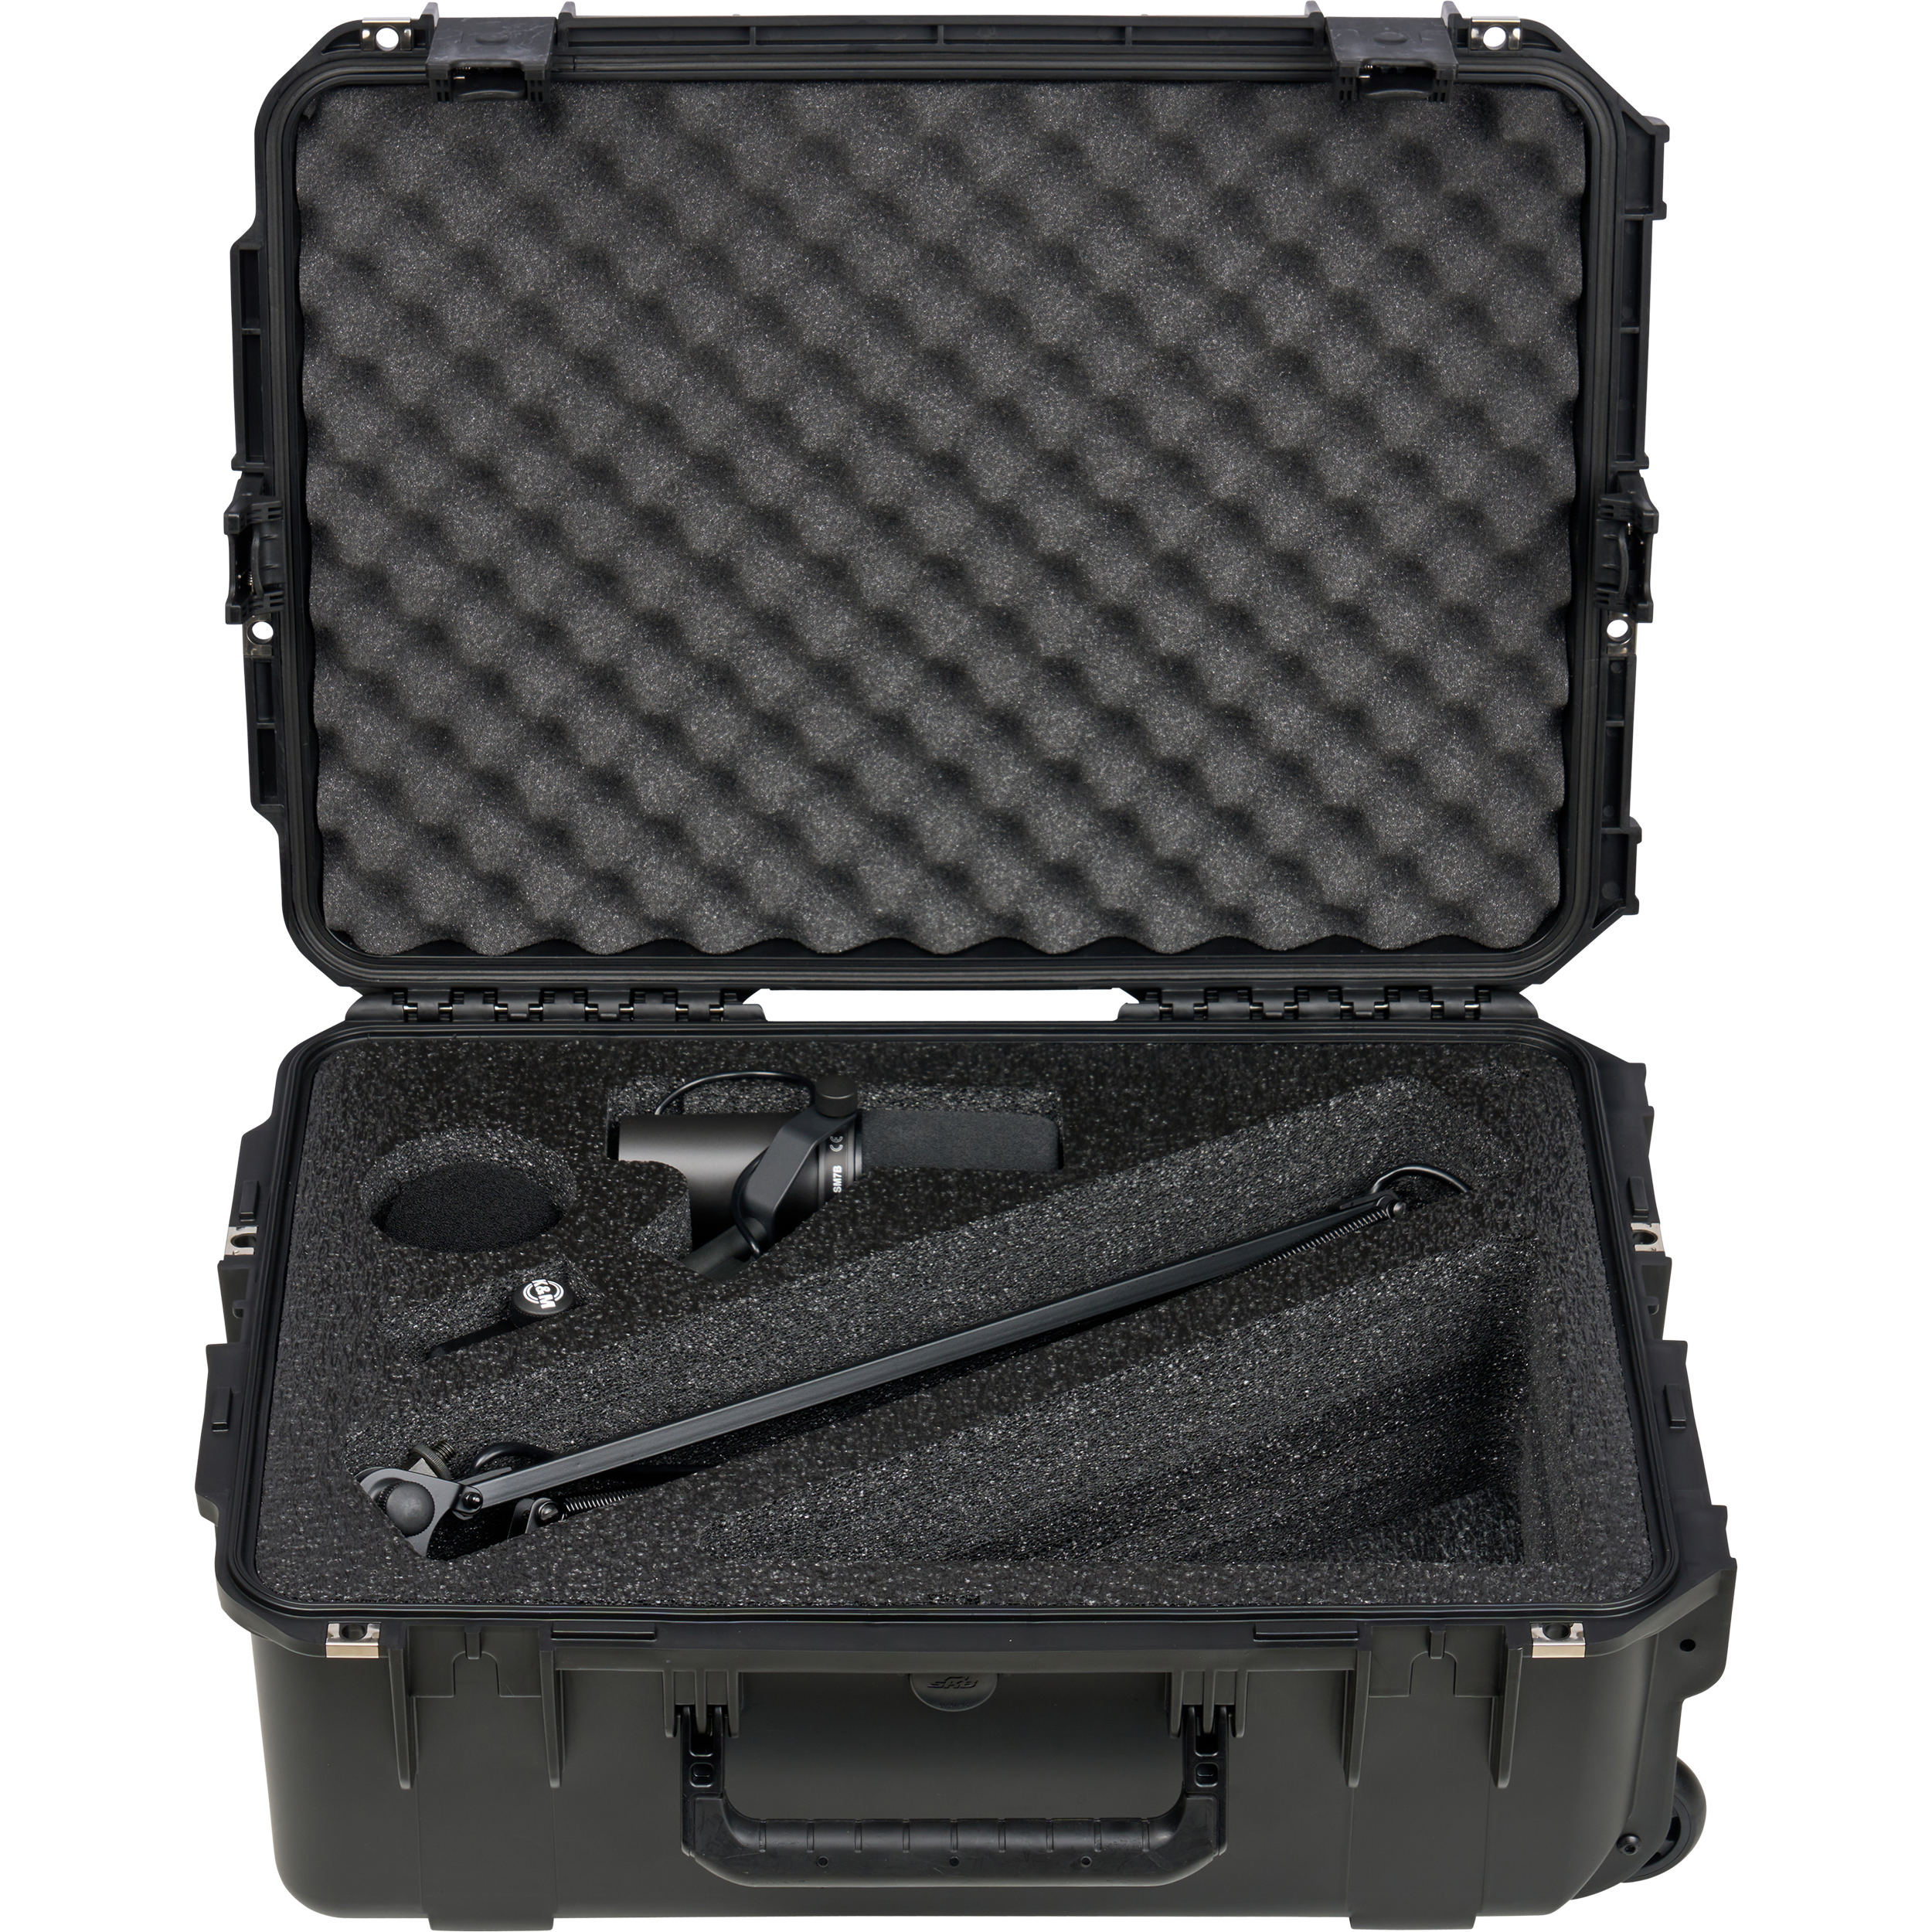 BYFP ipCase for Shure SM7B Broadcast Pack